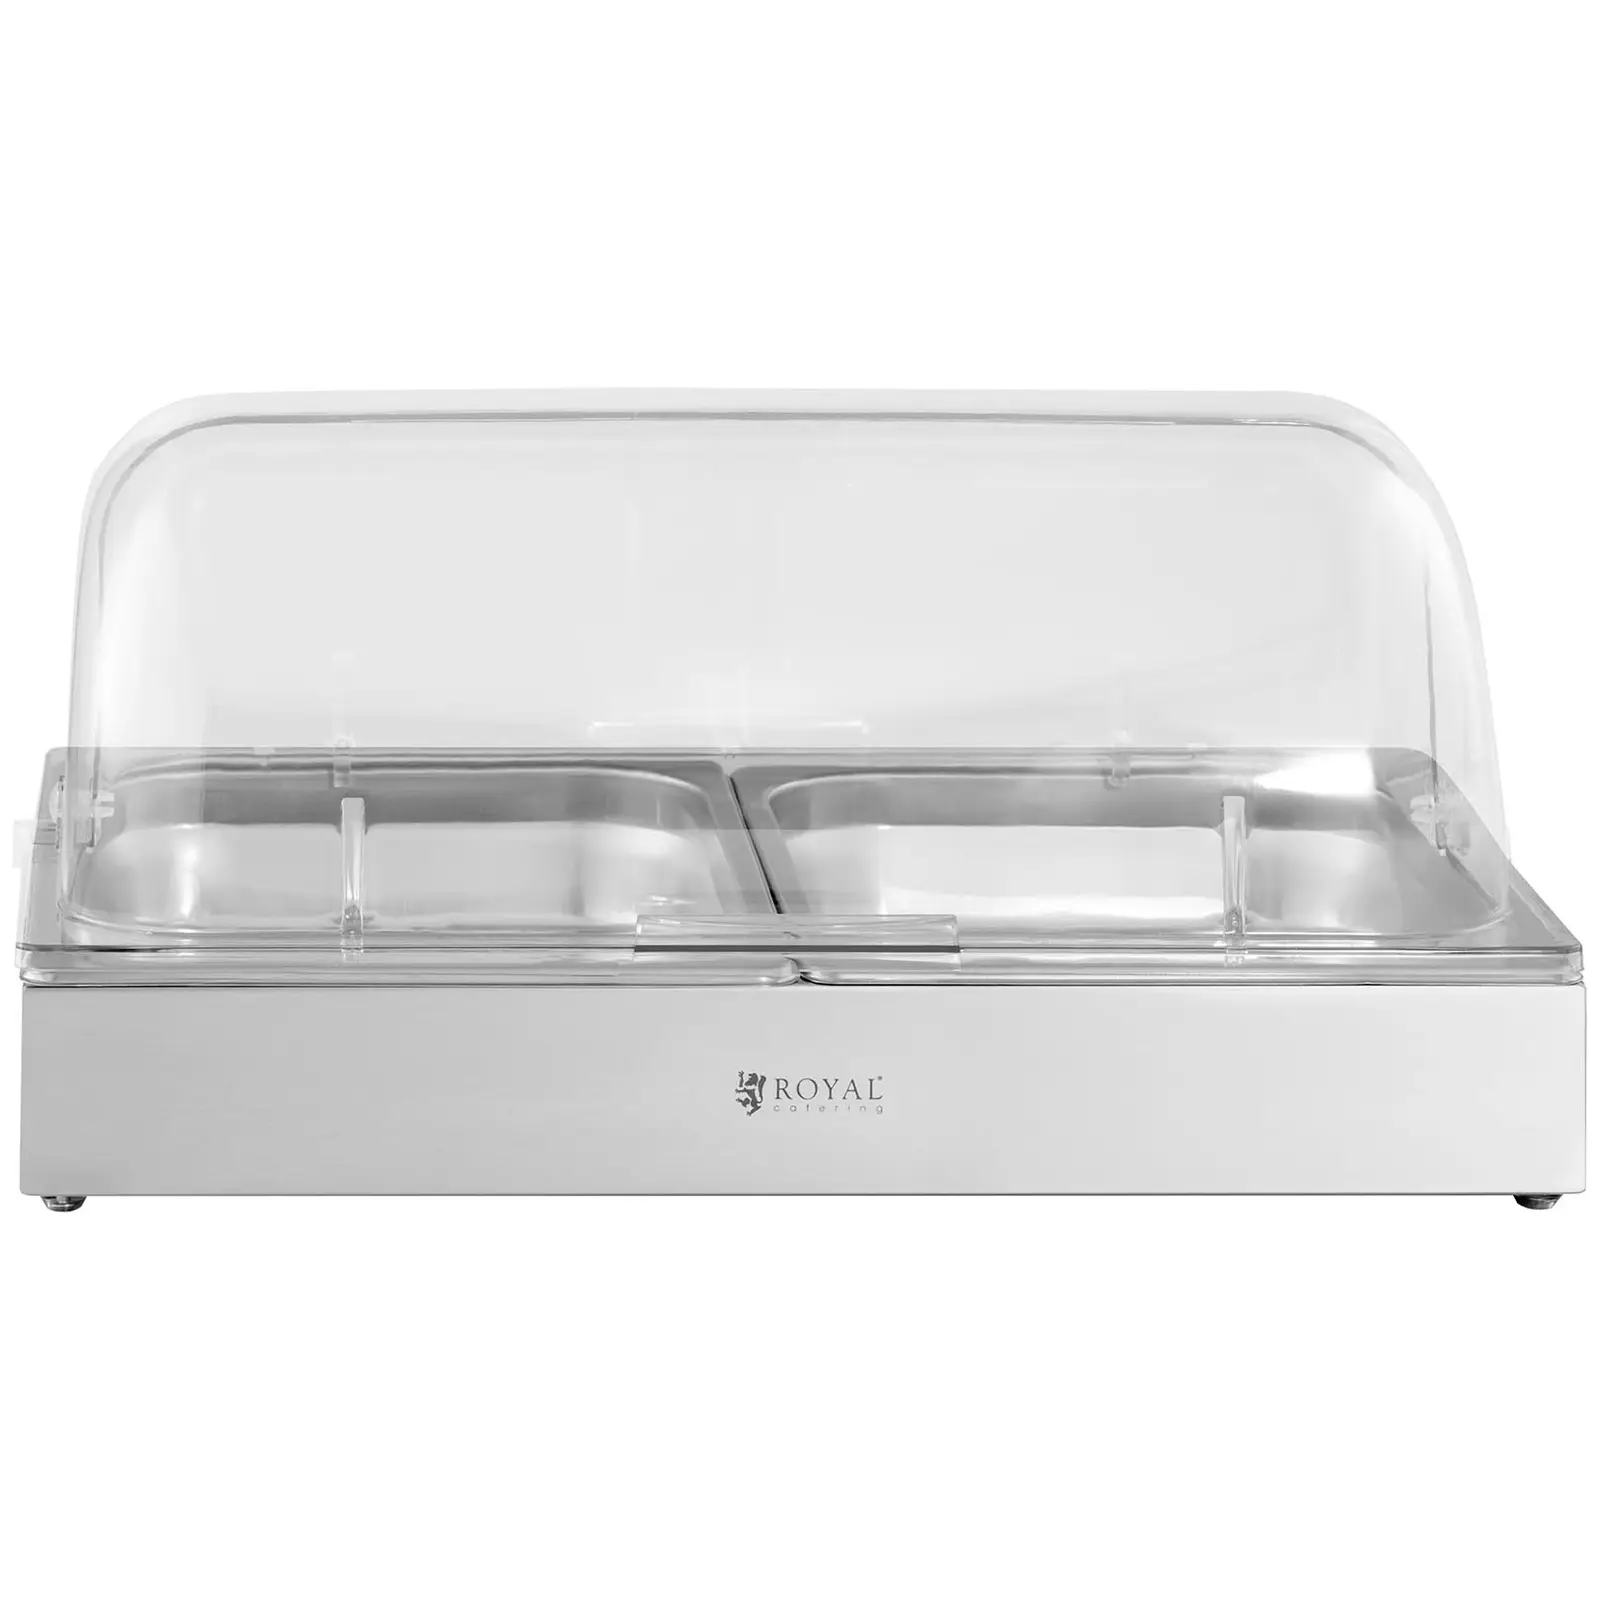 Buffet Display Case - 8 L - Royal Catering - 535 x 335 x 250 mm